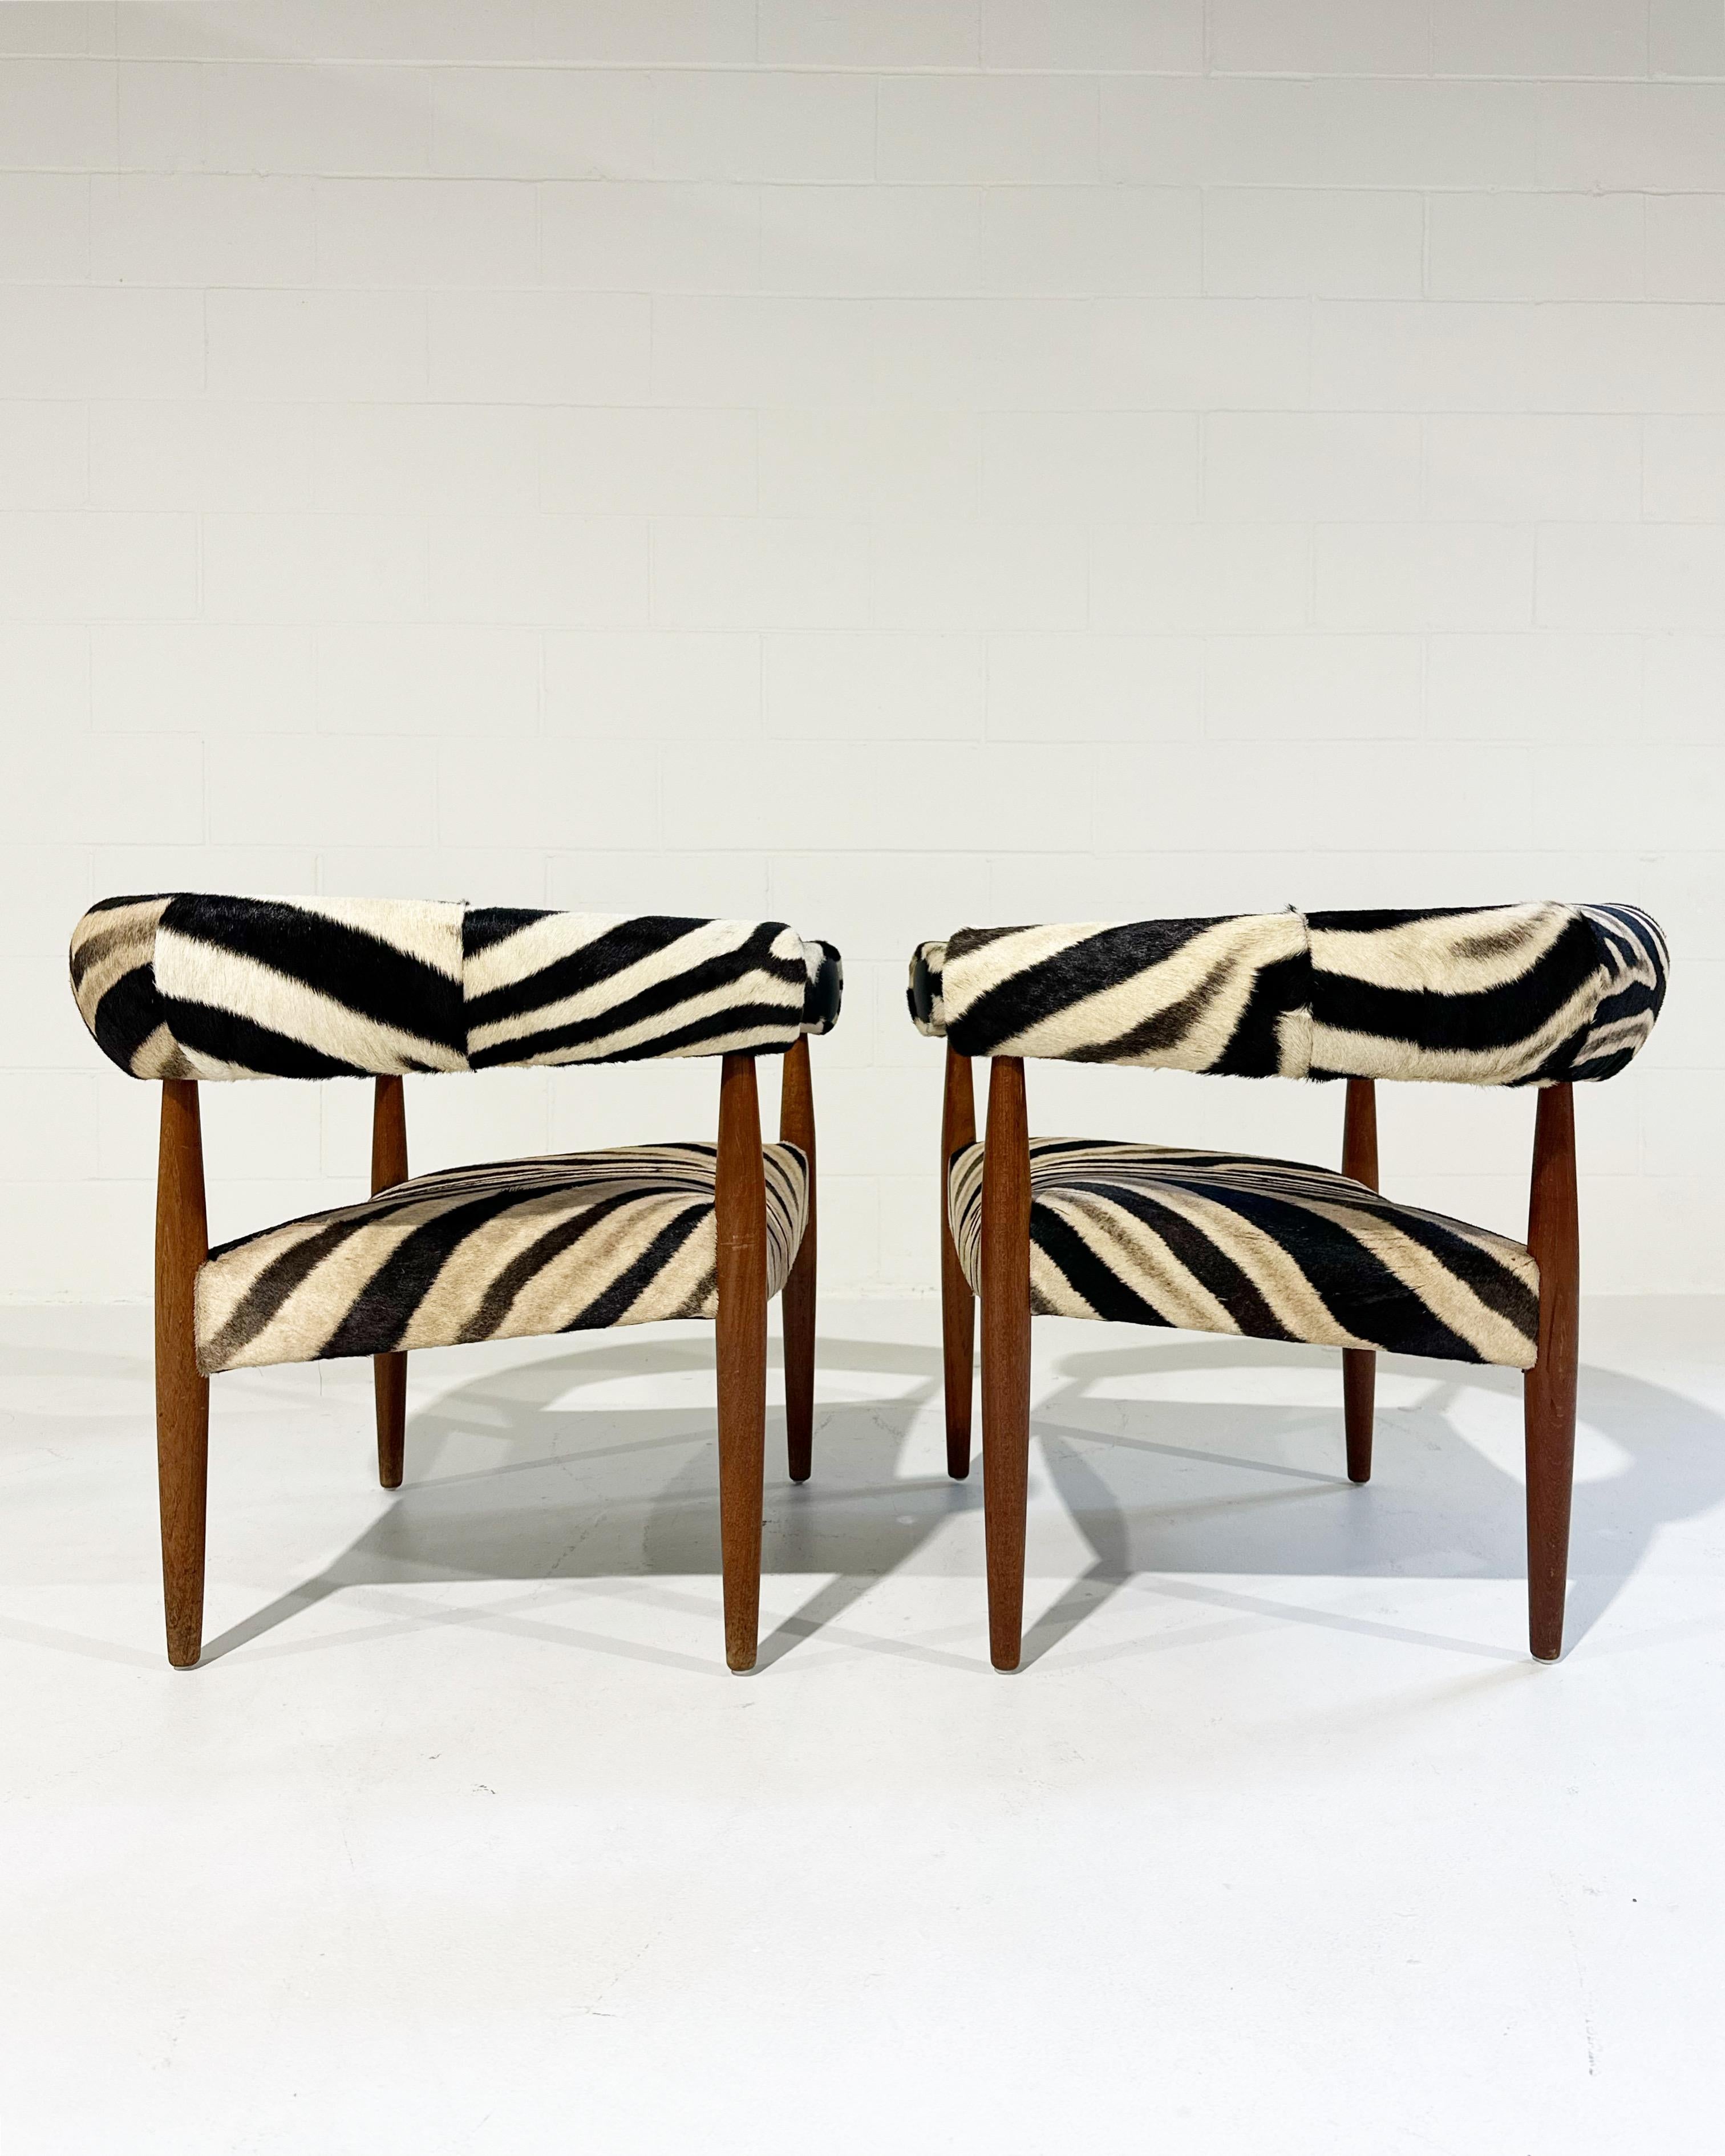 Vintage Nanna and Jorgen Ditzel Ring Lounge Chairs in Zebra Hide 1